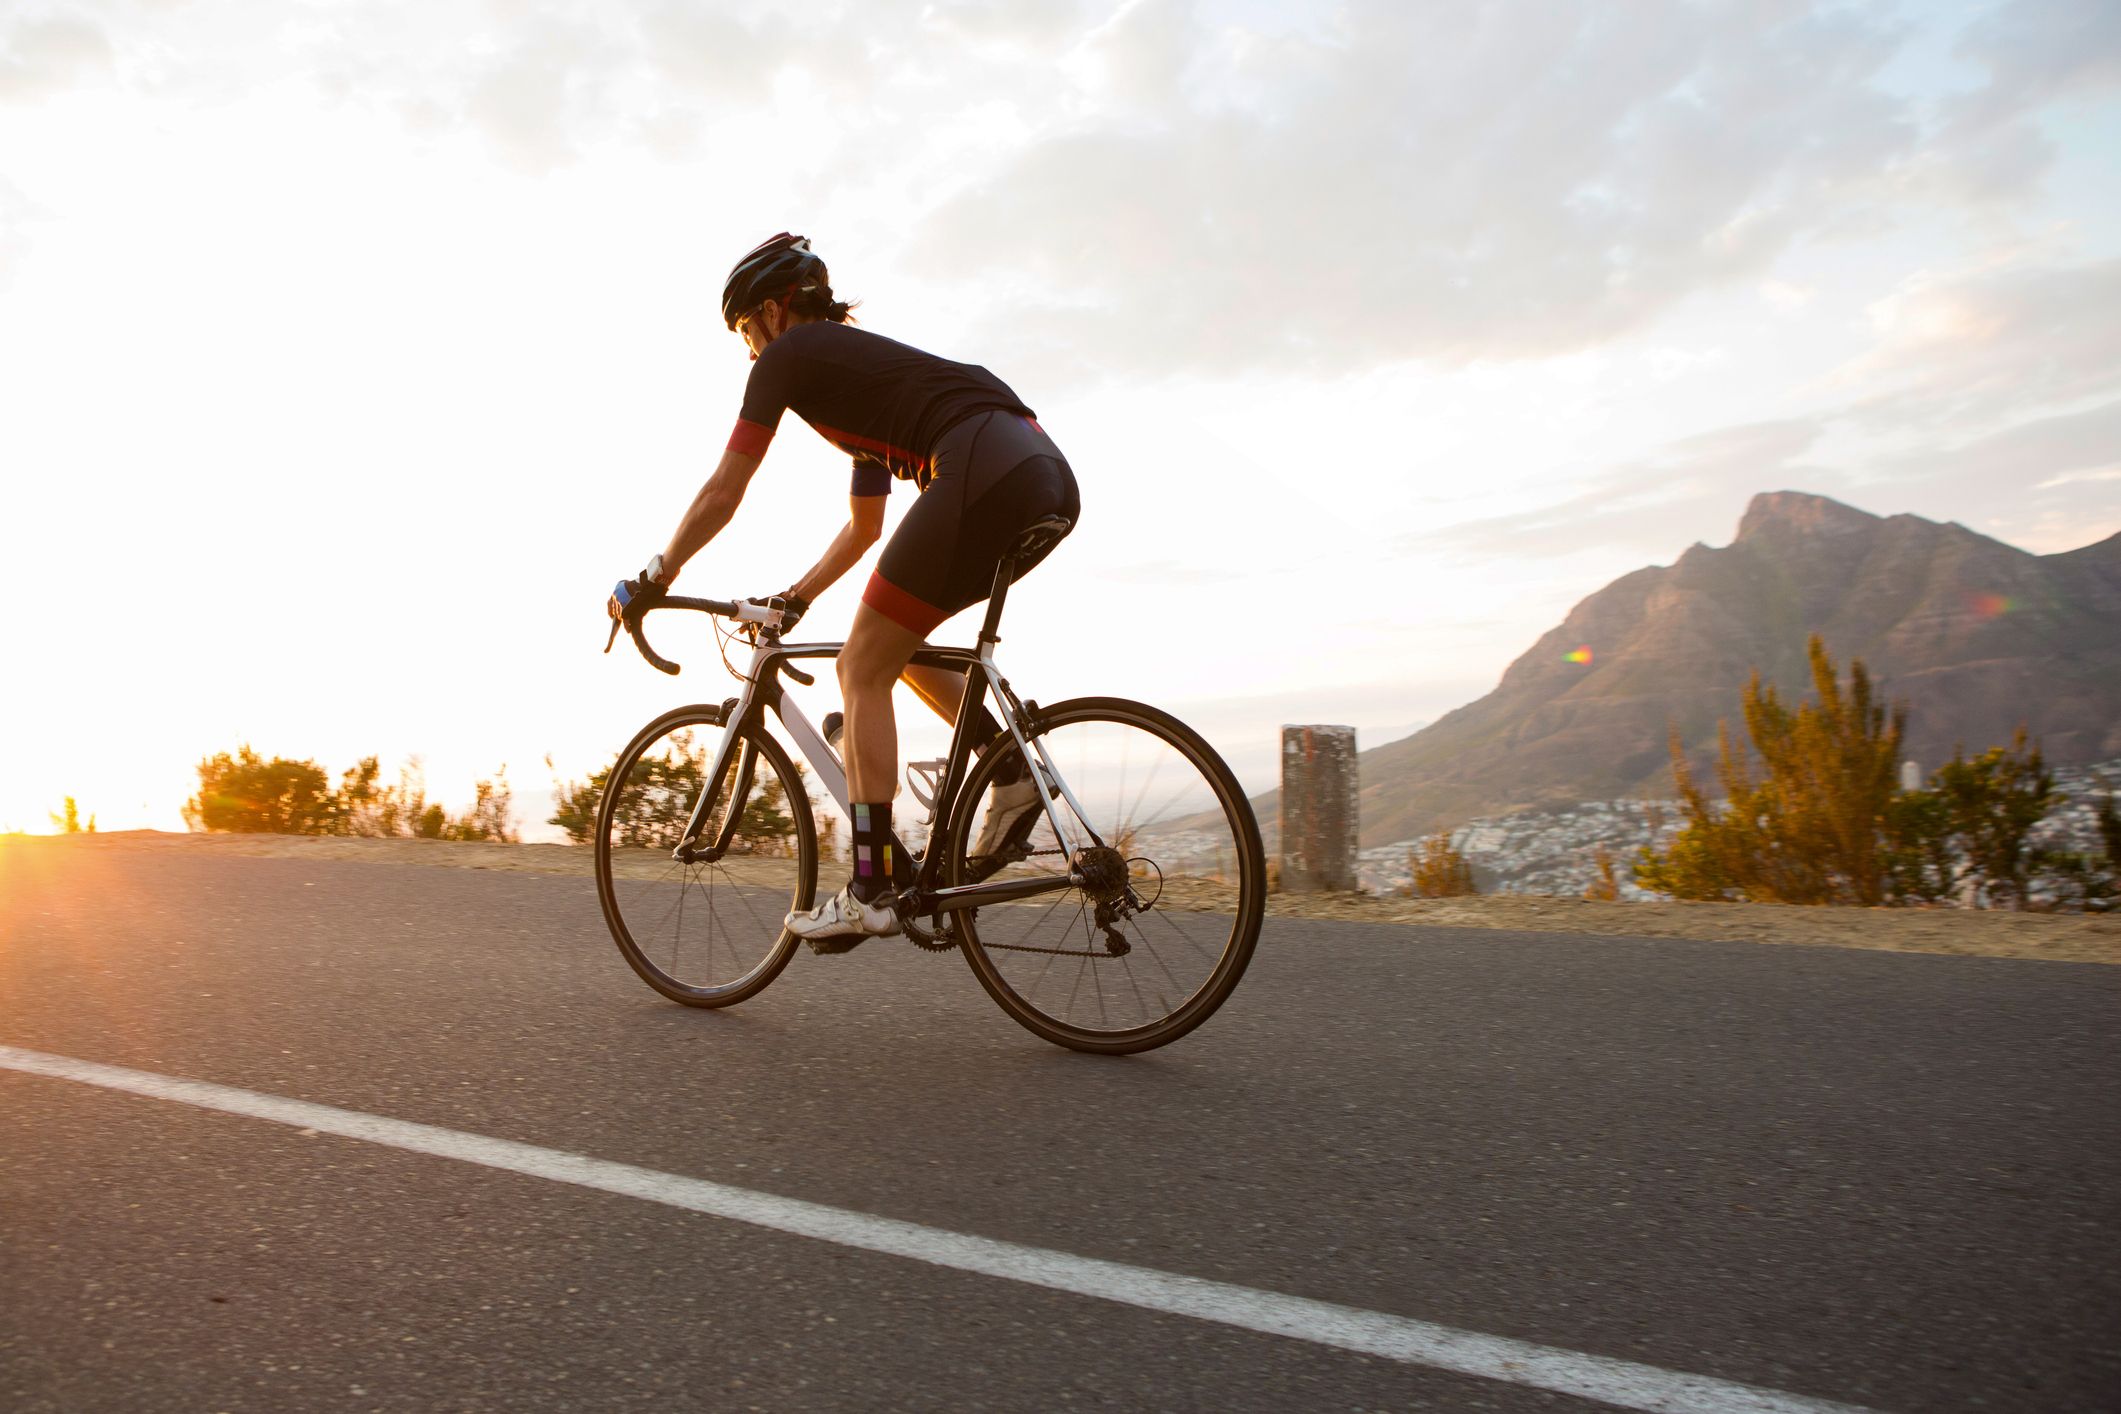 Want to take your riding up a level? Here's how to become a better